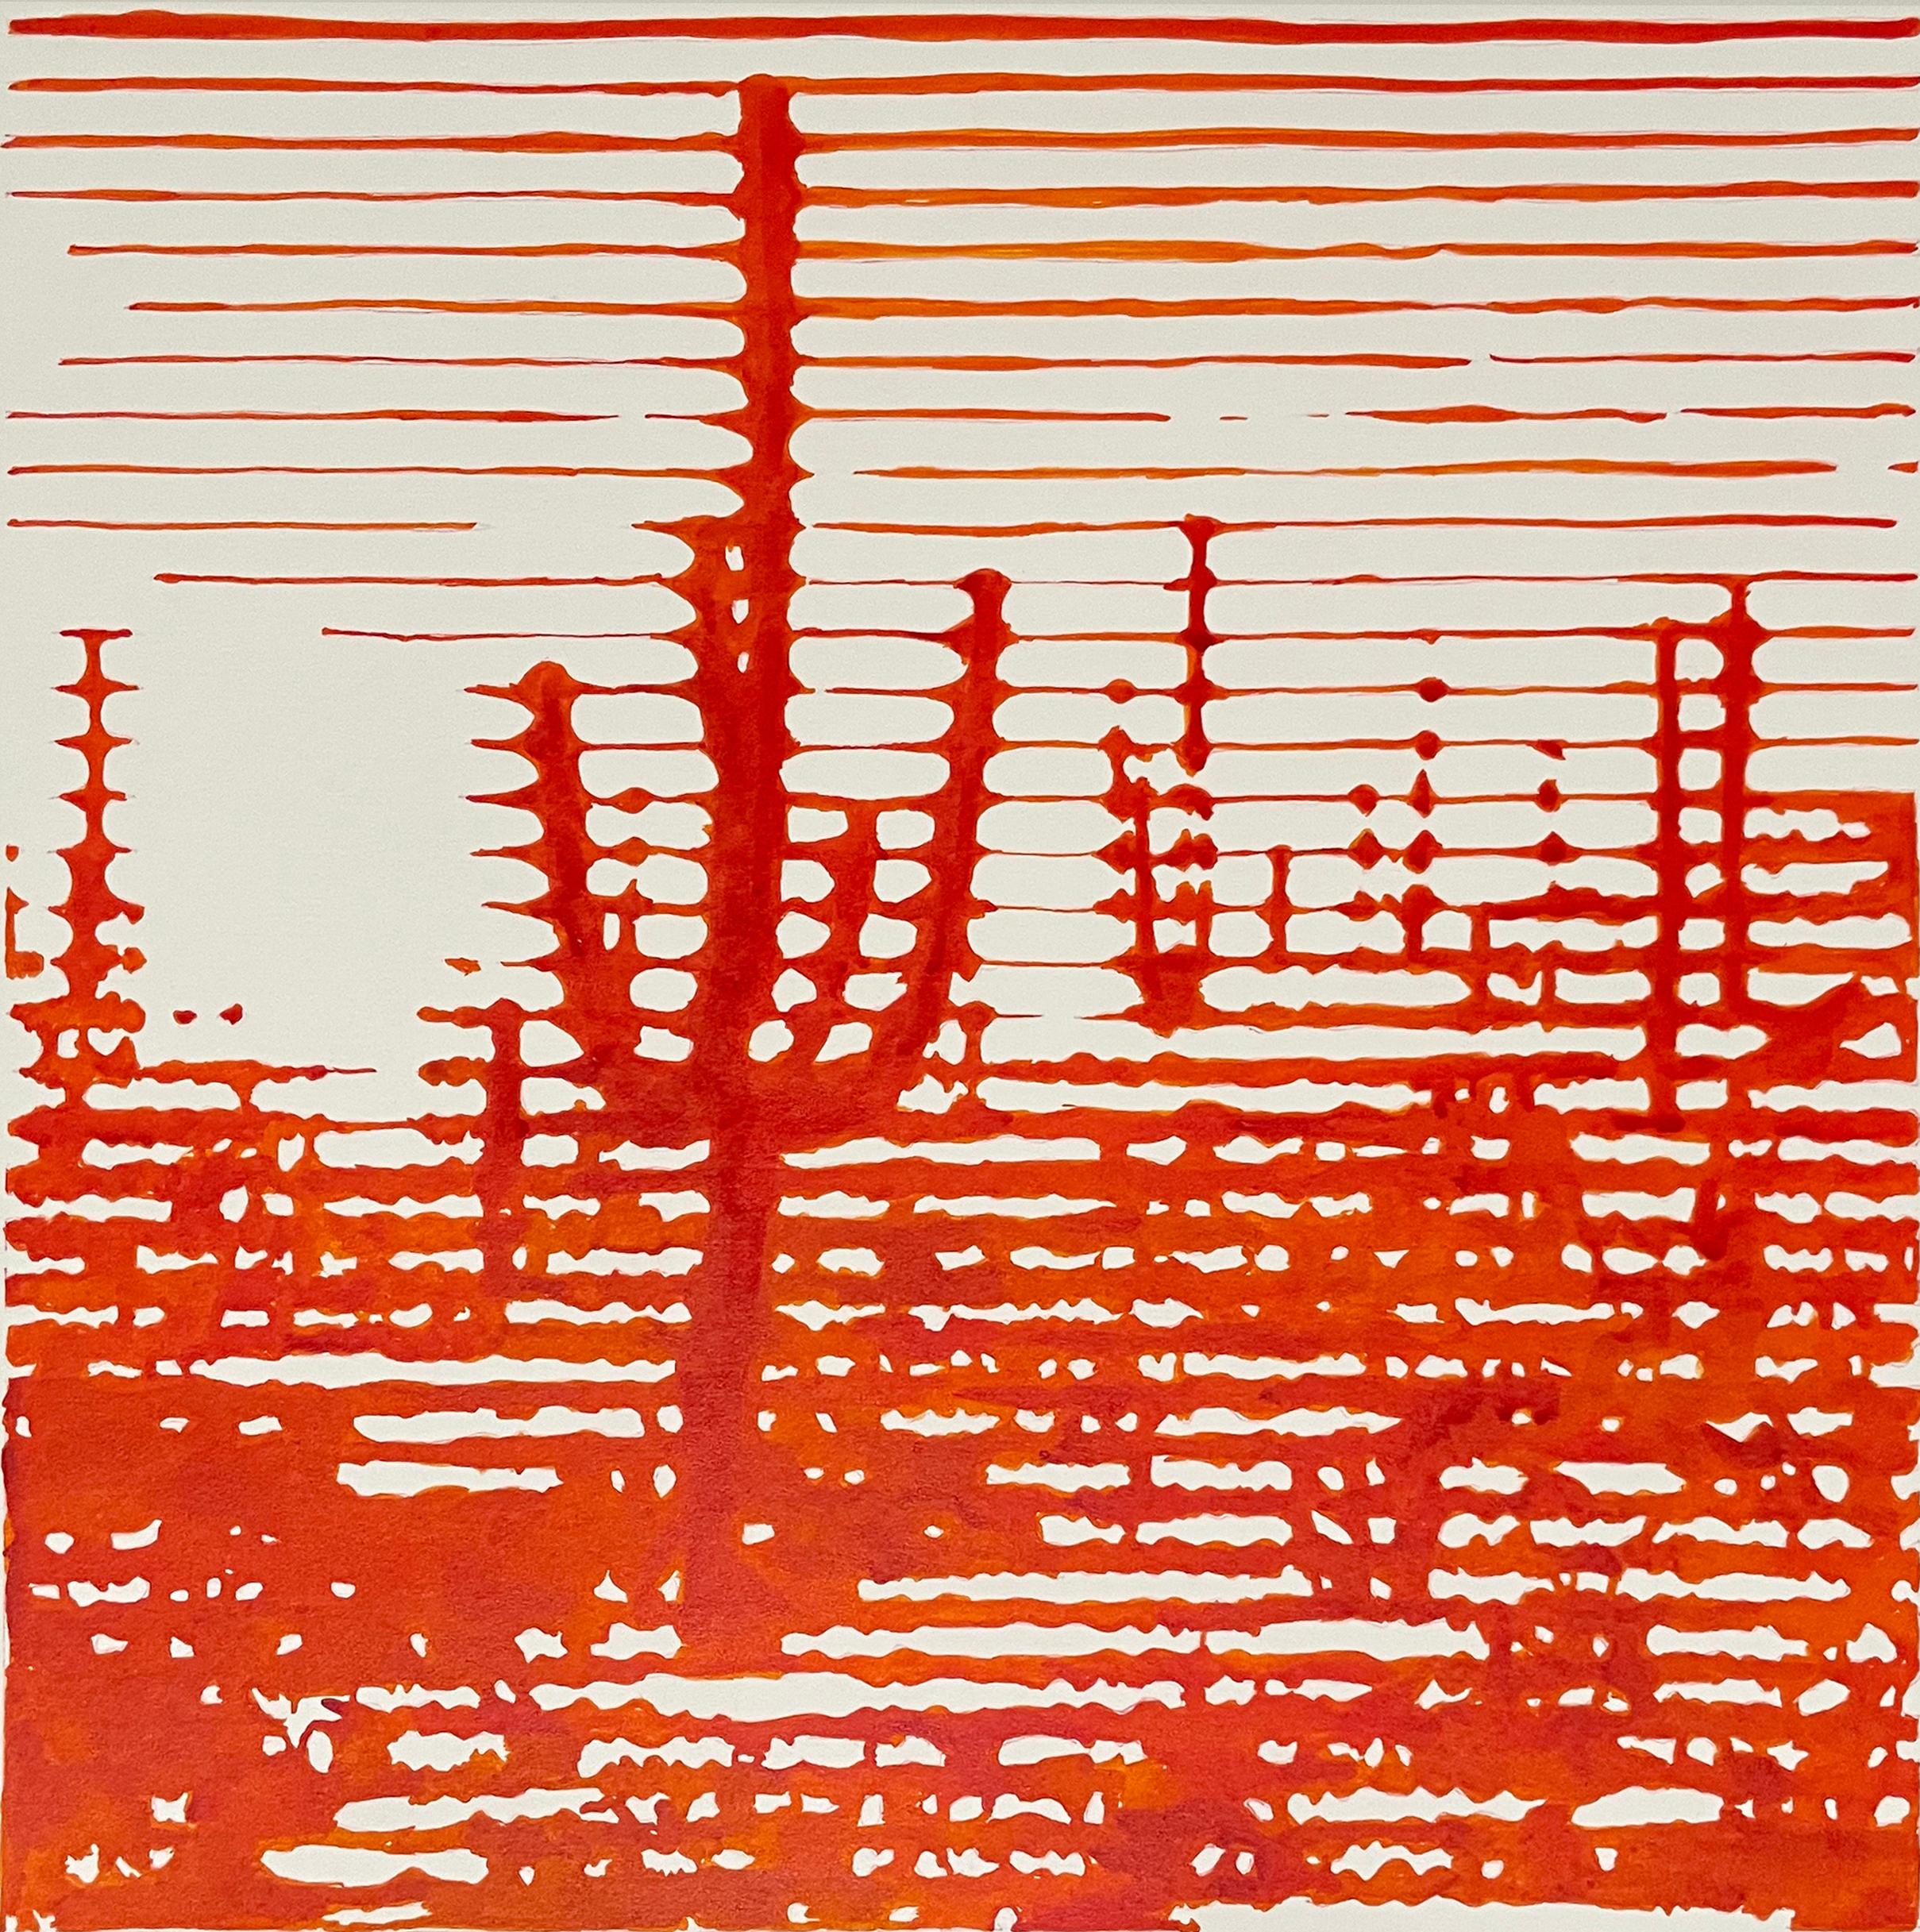 Desert Cactus (Orange), orange and white painting of cacti in the desert - Painting by Charles Buckley